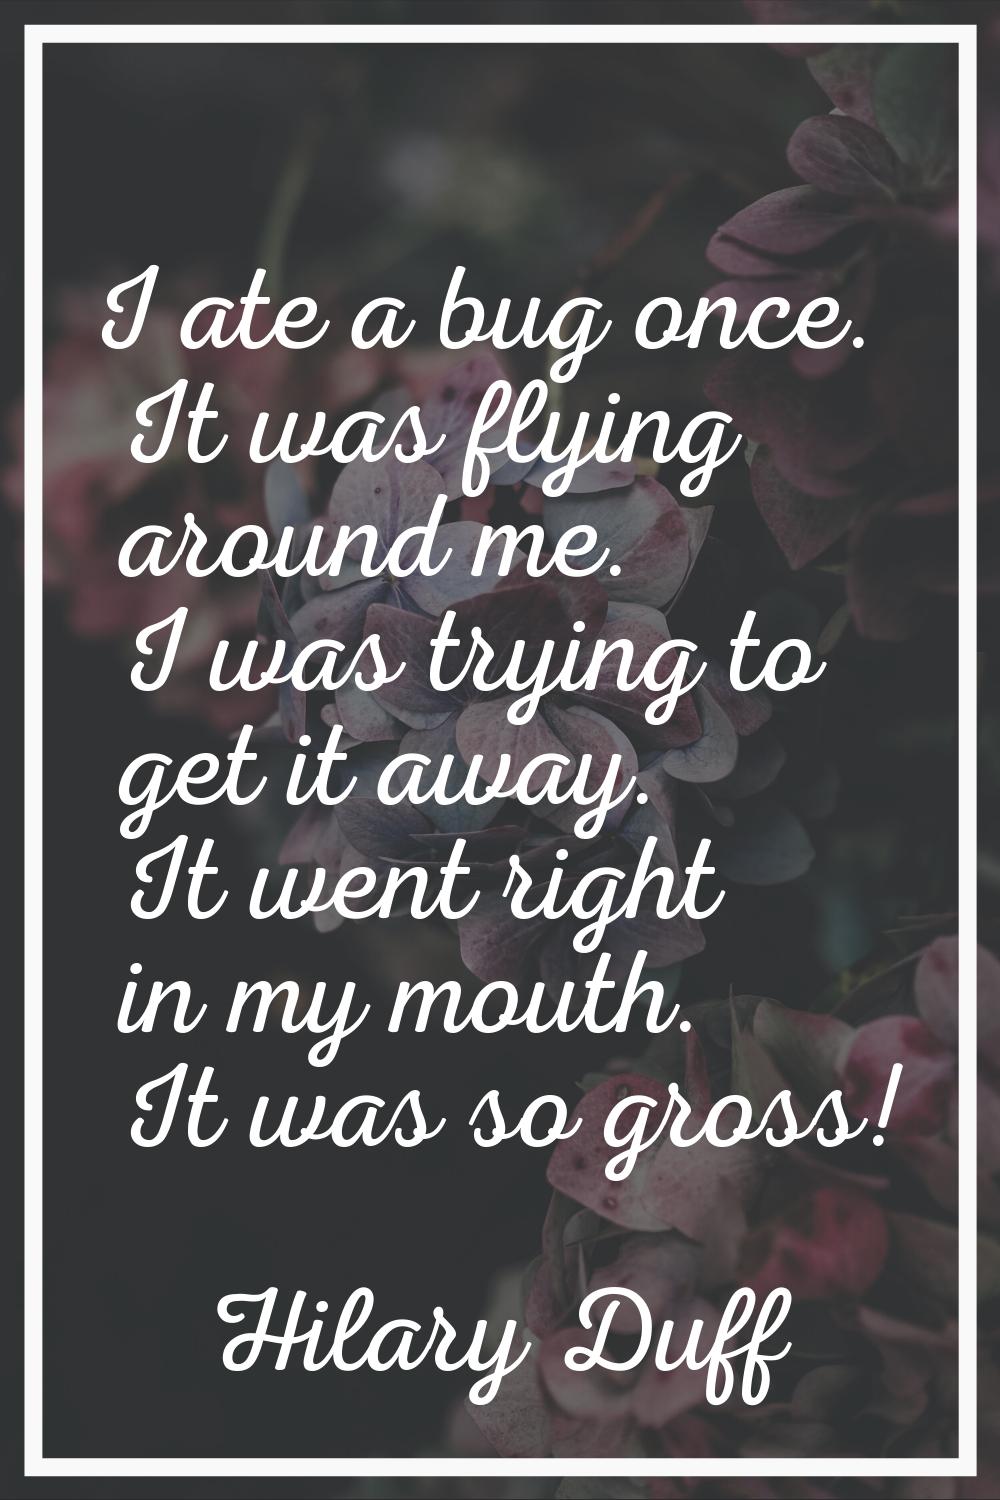 I ate a bug once. It was flying around me. I was trying to get it away. It went right in my mouth. 